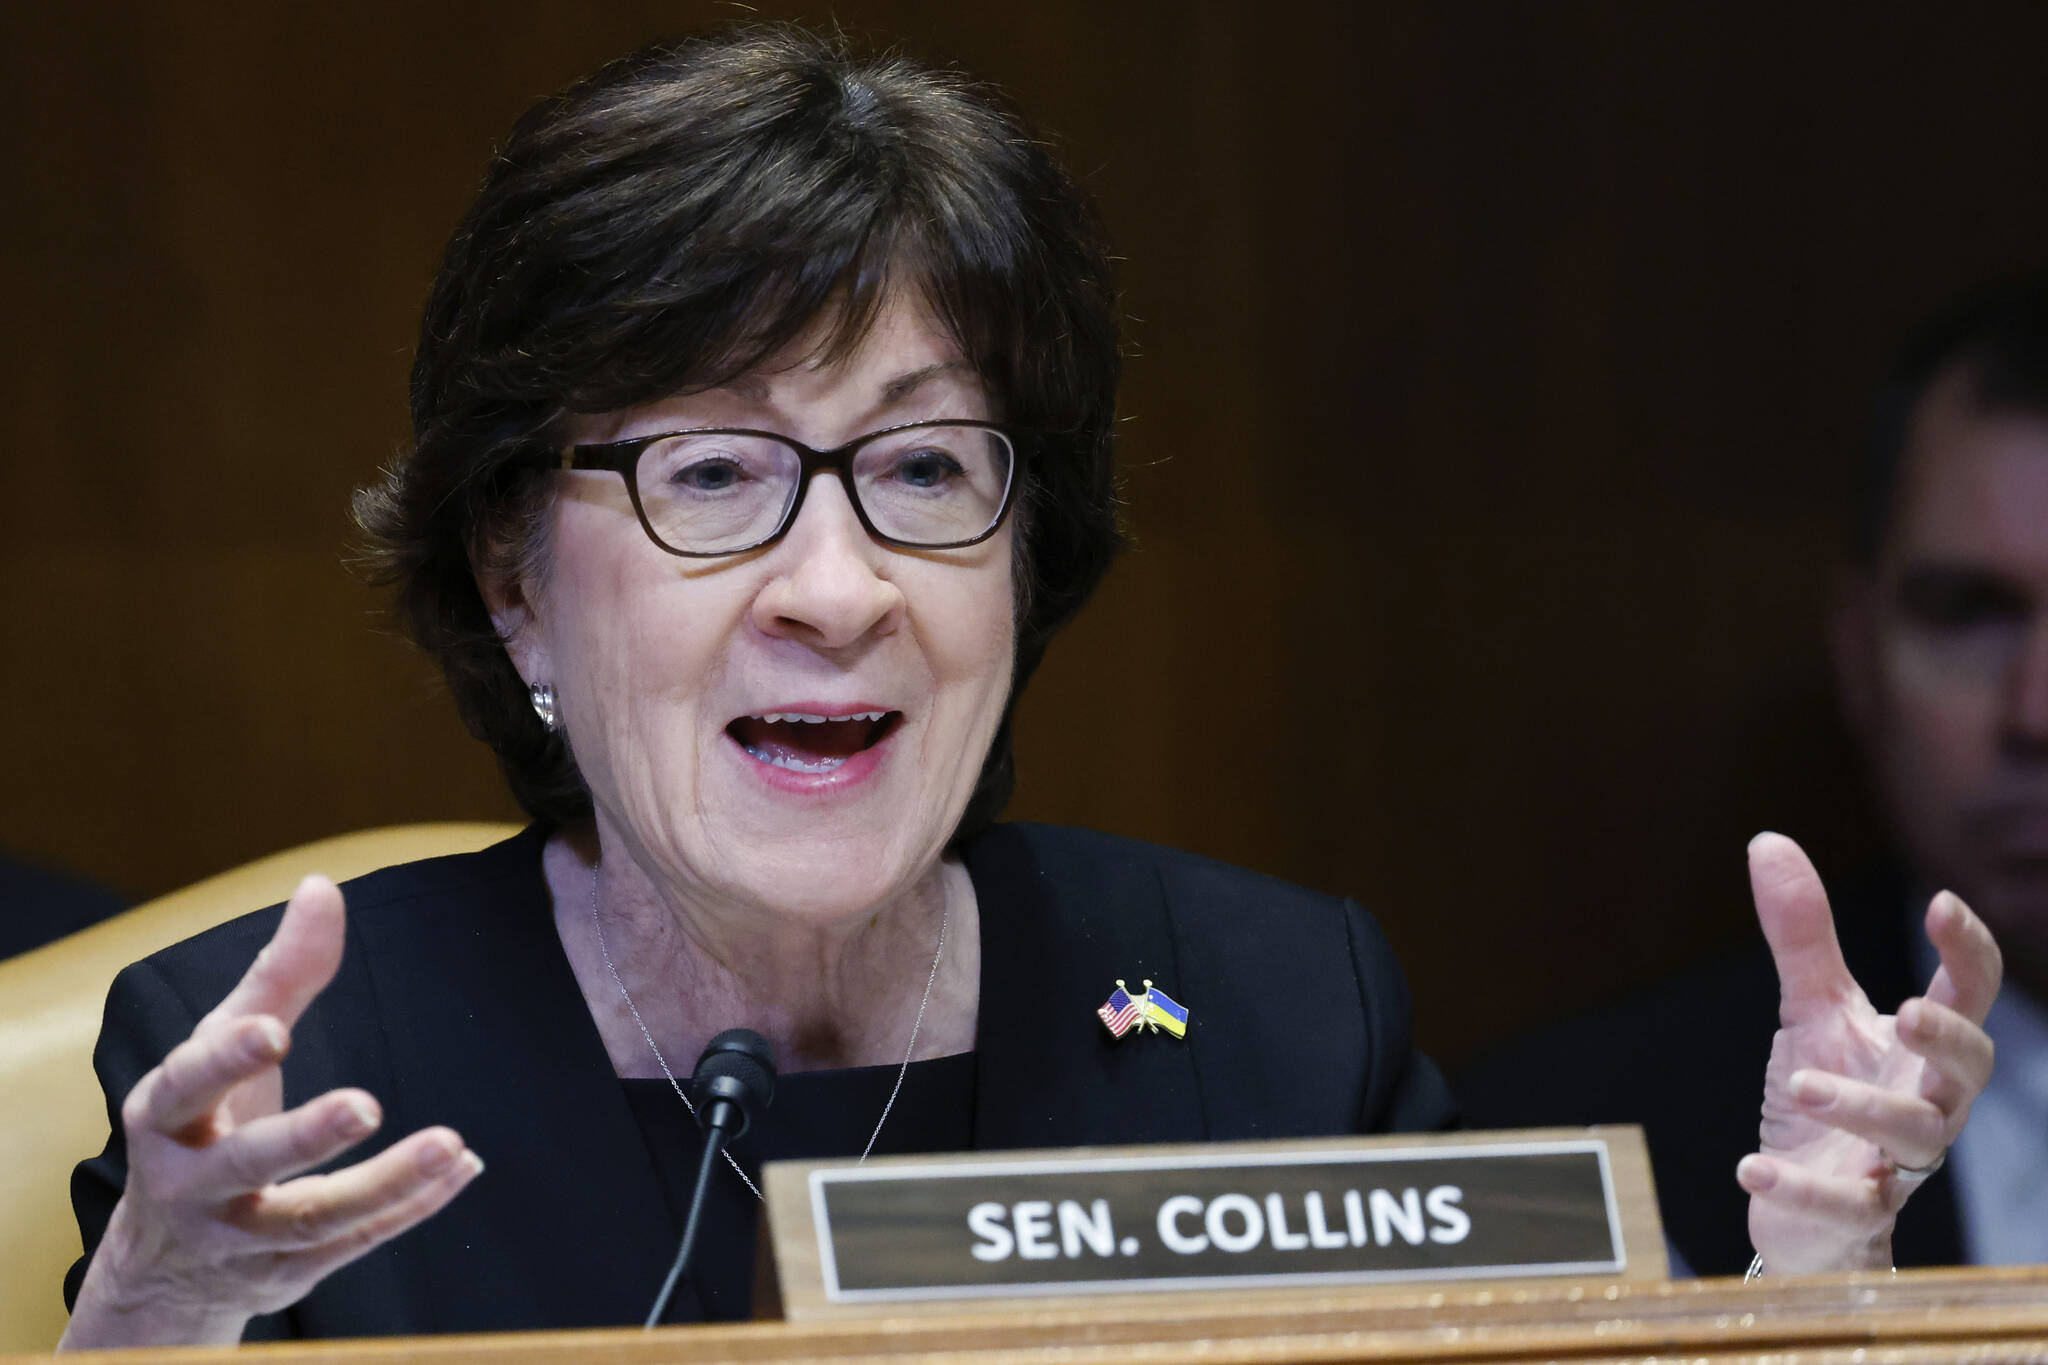 Sen. Susan Collins, R-Maine, speaks during hearing on the fiscal year 2023 budget for the FBI in Washington, May 25, 2022. A bipartisan group of senators, including Collins, released proposed changes July 20, to the Electoral Count Act, the post-Civil War-era law for certifying presidential elections that came under intense scrutiny after the Jan. 6 attack on the Capitol and Donald Trump’s effort to overturn the 2020 election. (Ting Shen / Pool Photo)